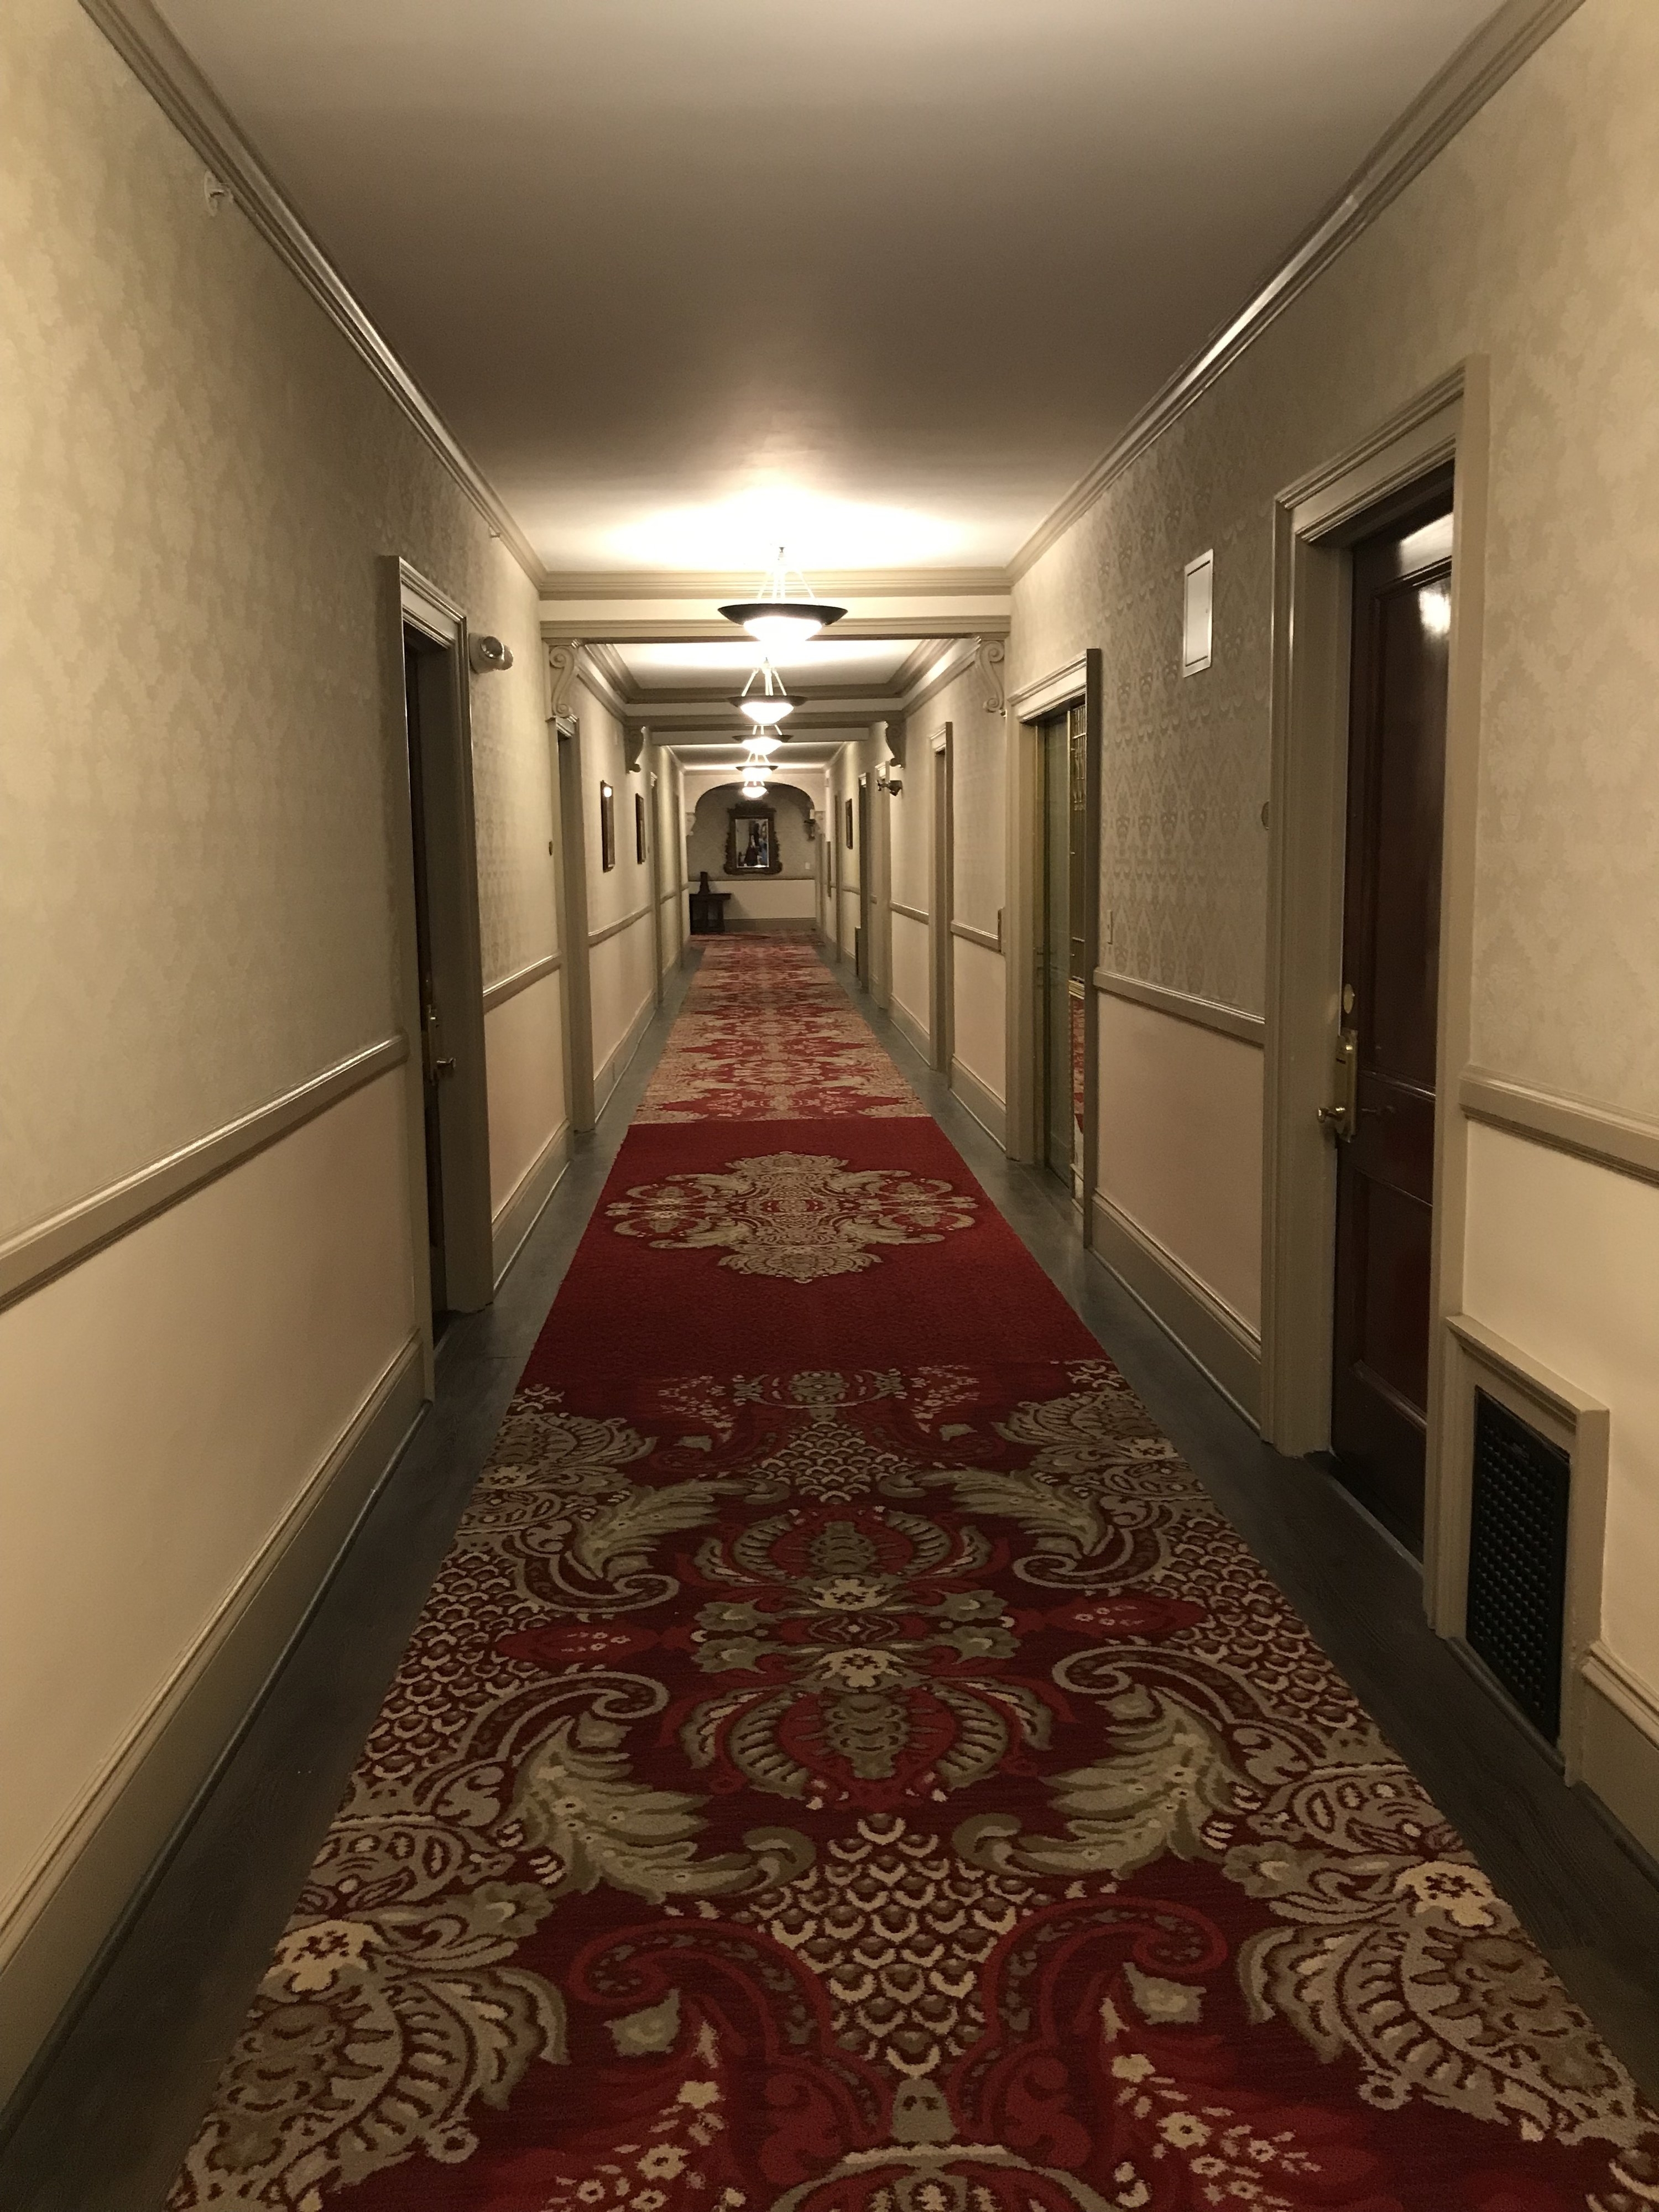 Facts About The Haunted Hotel That Inspired Stephen King S